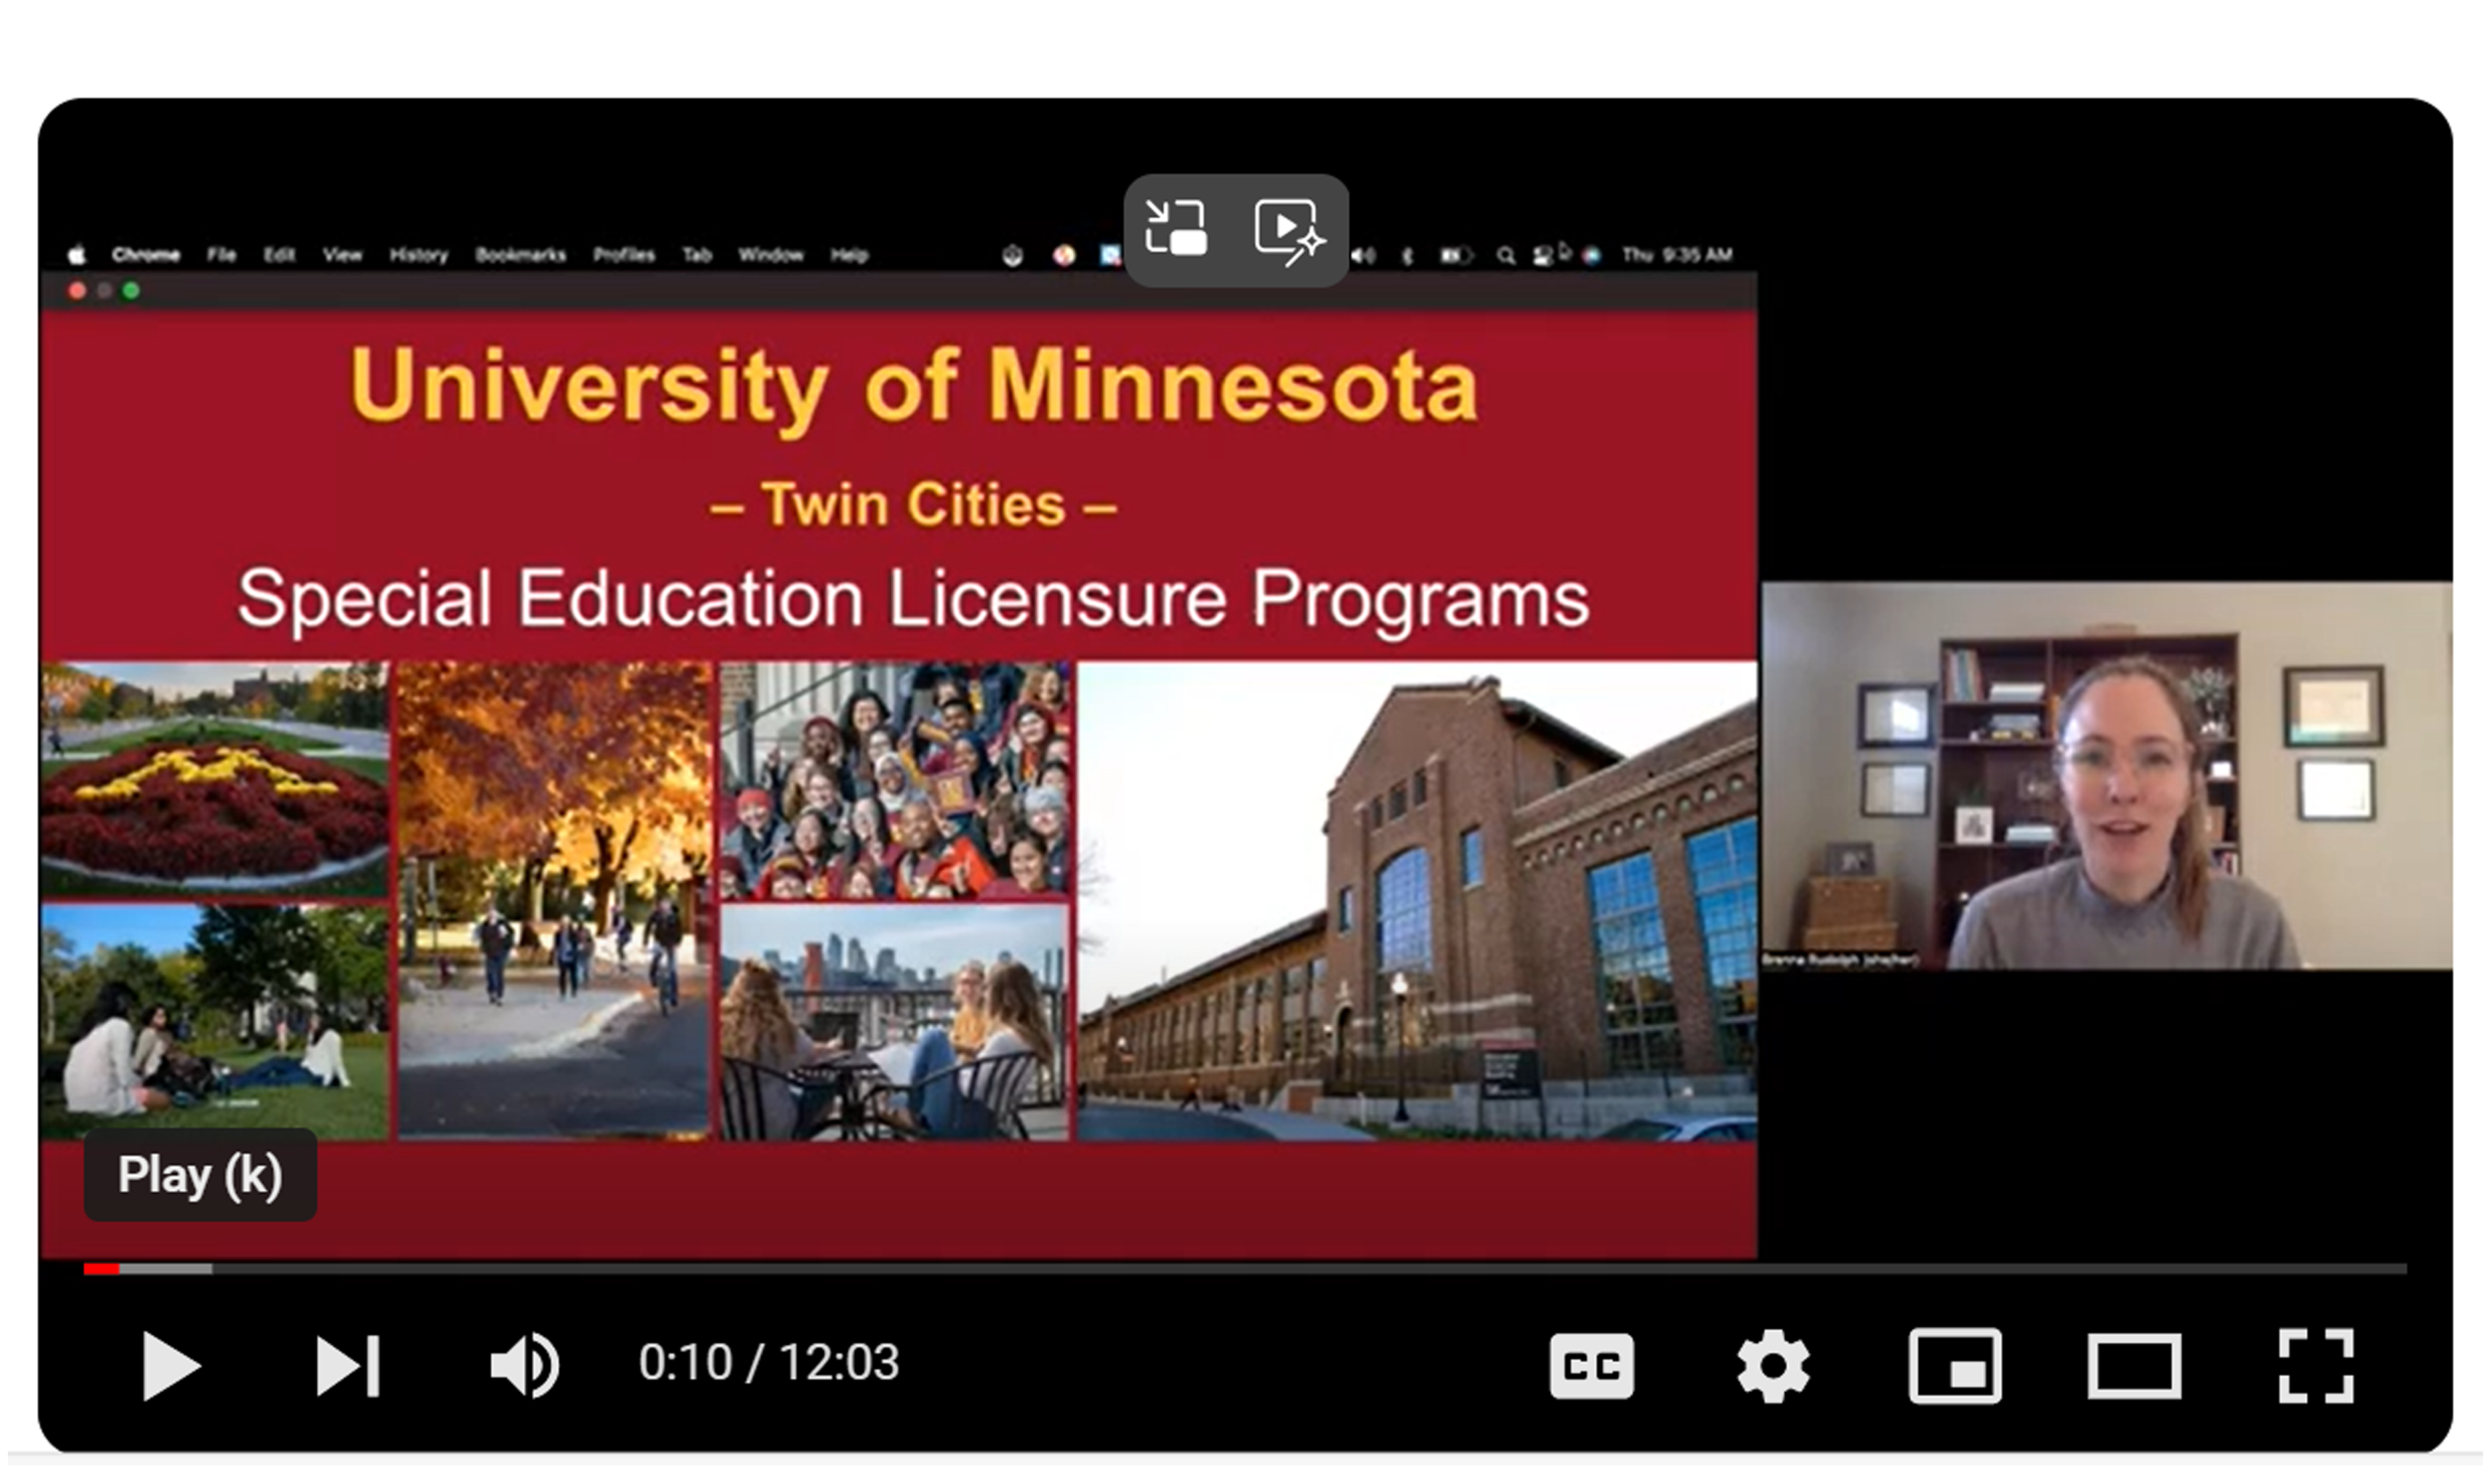 Special Education Programs at University of Minnesota, Twin Cities, video